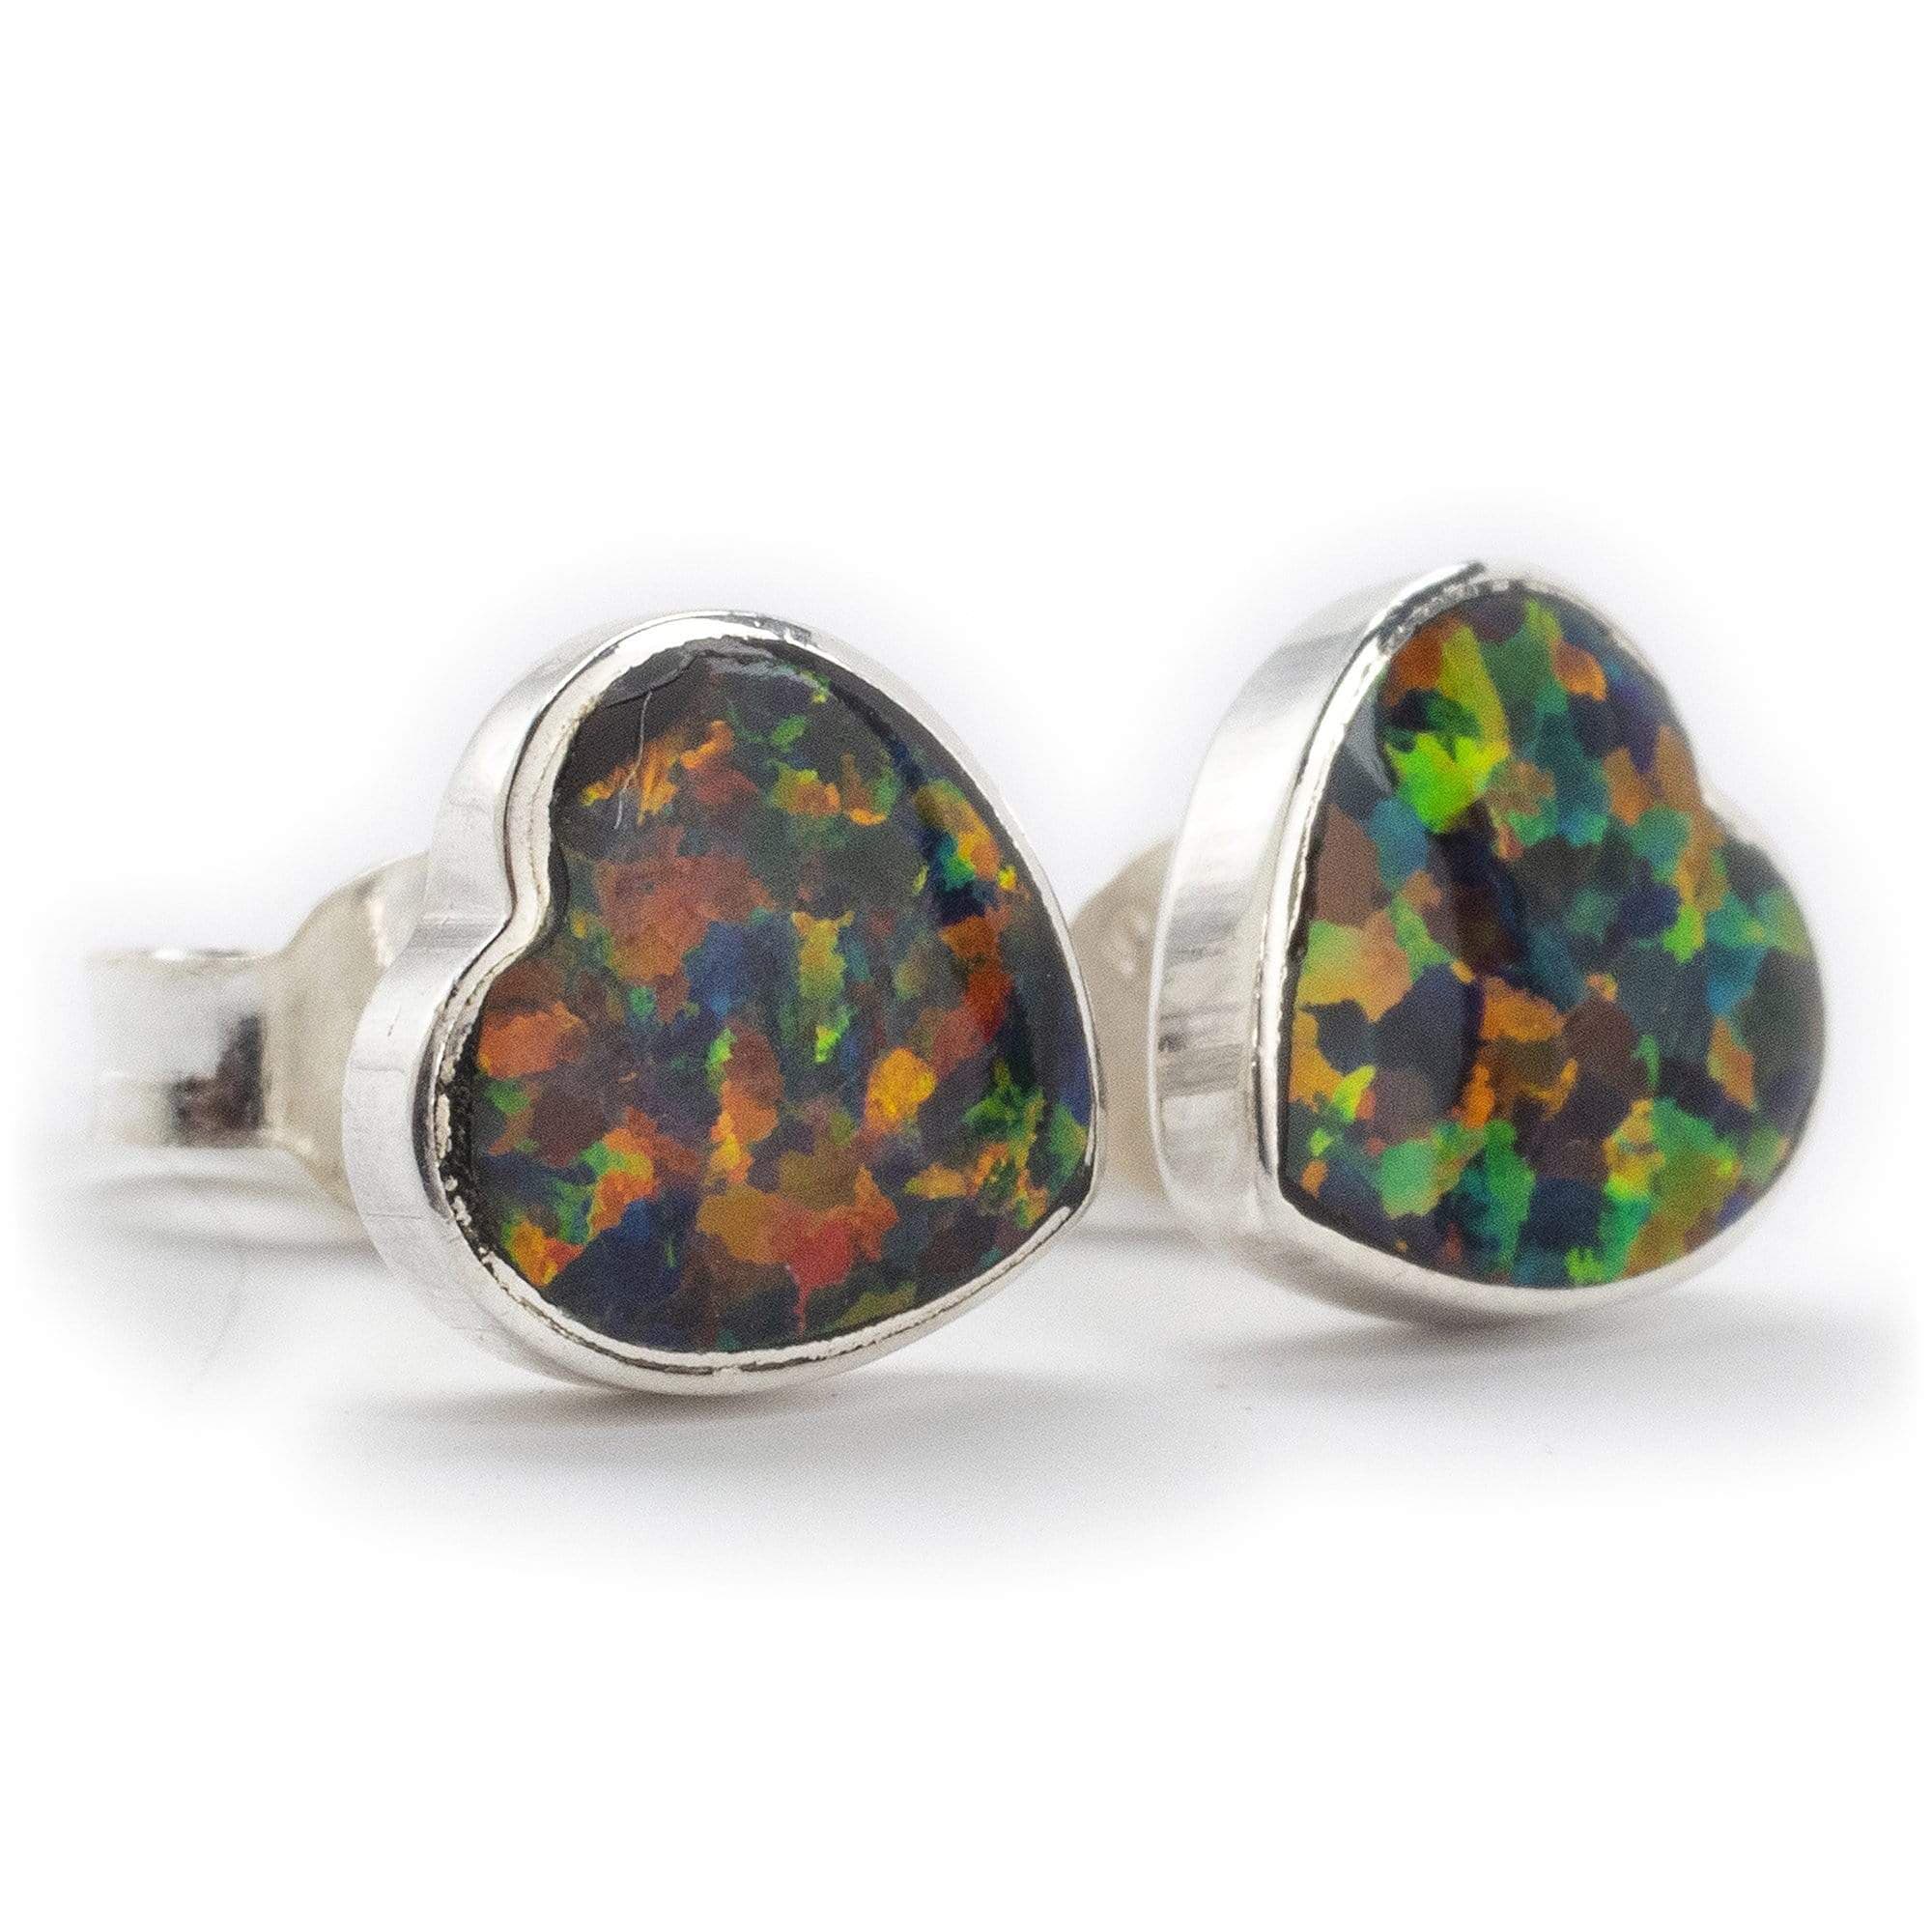 Kalifano Southwest Silver Jewelry Rainbow Opal Heart 925 Sterling Silver Earring with Stud Backing Handmade NME.0021.RO